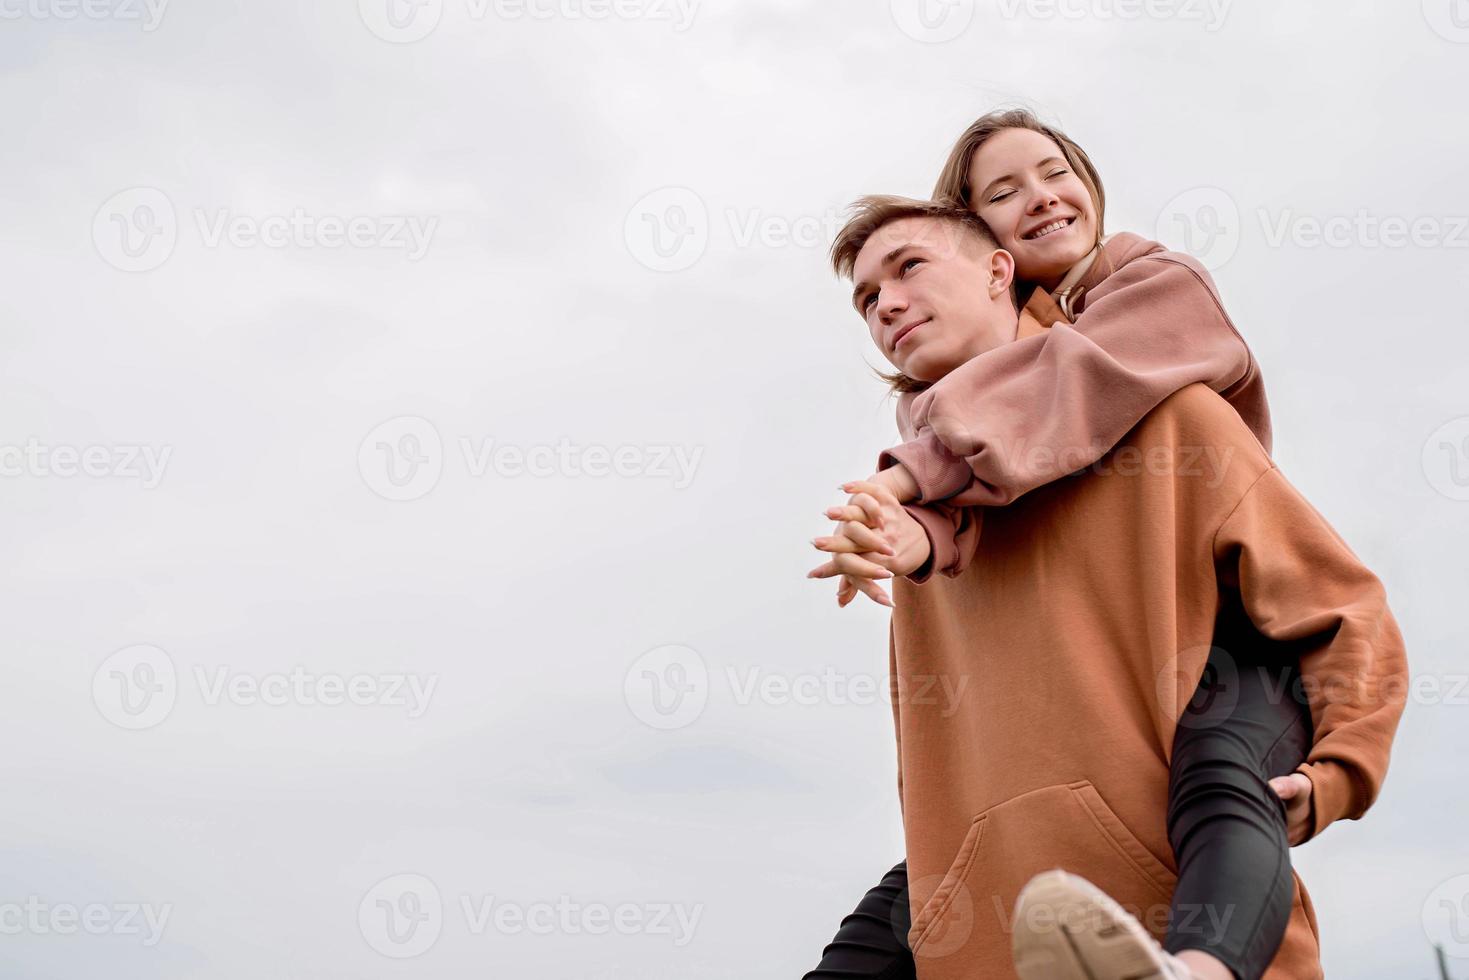 couple embracing each other outdoors in the park on sky background photo